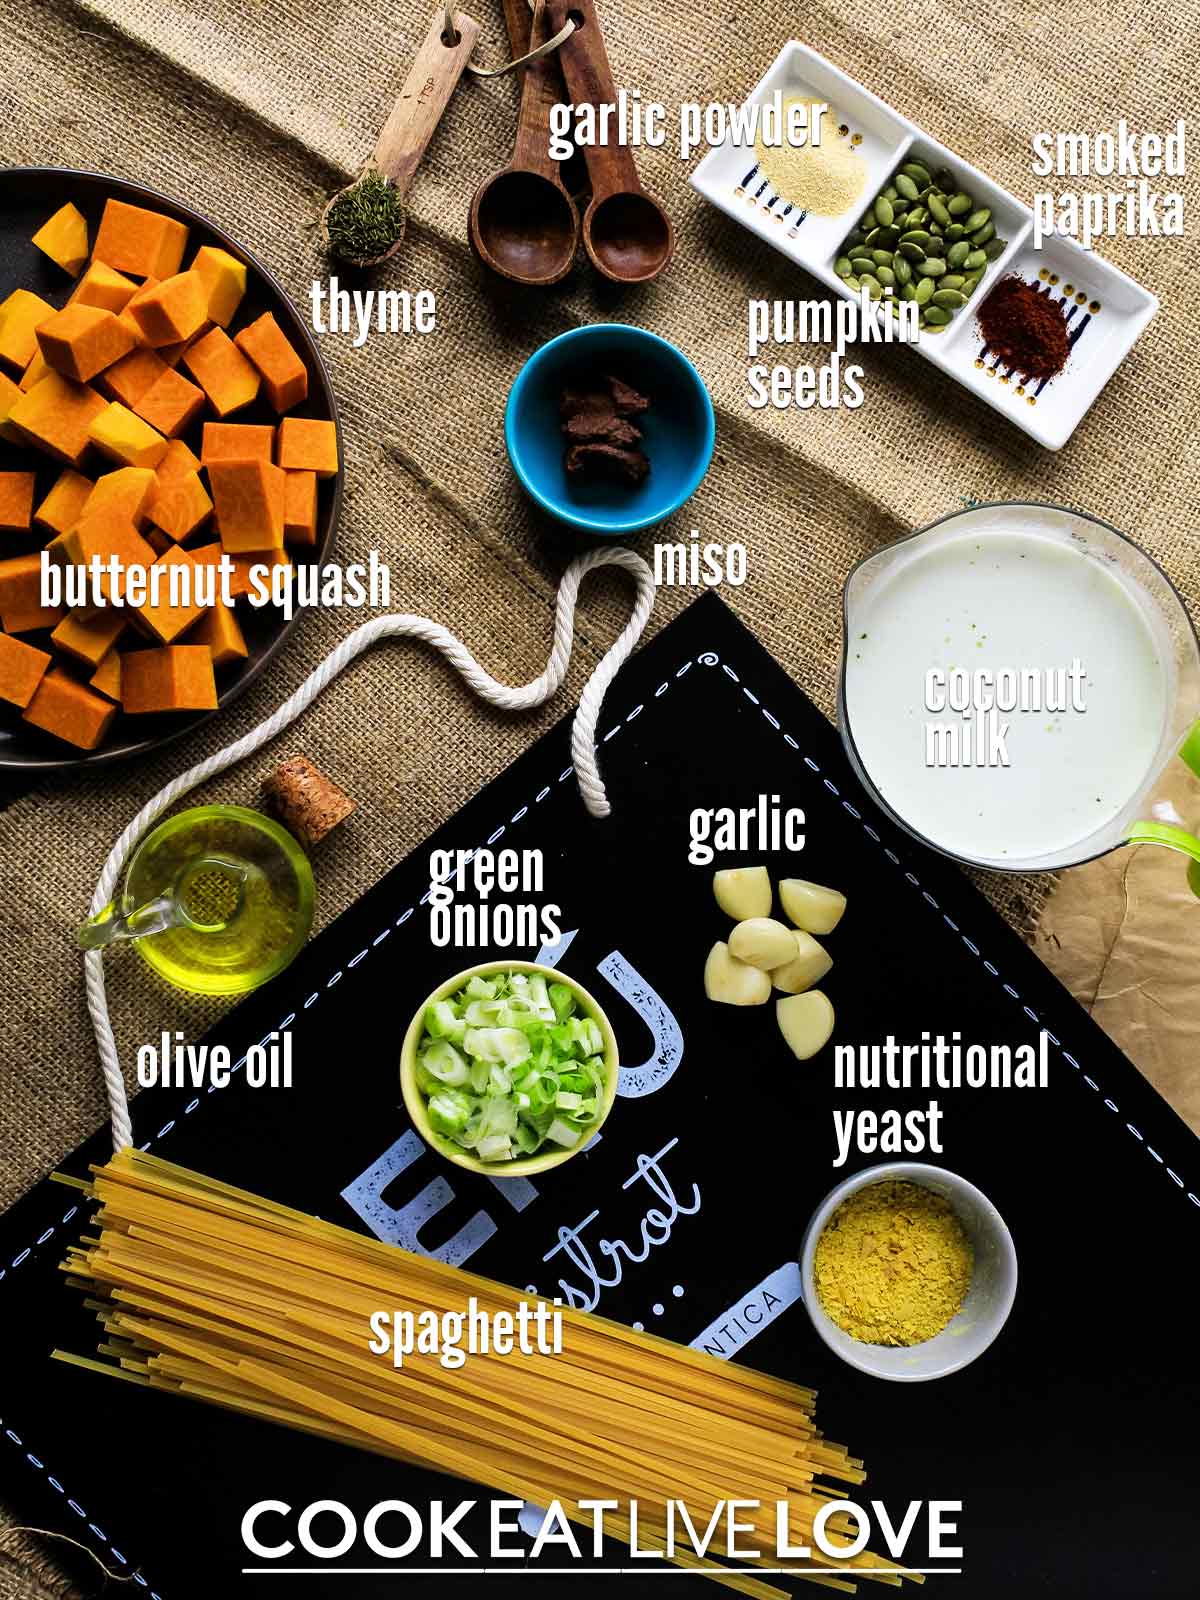 Ingredients to make butternut squash sauce for pasta.